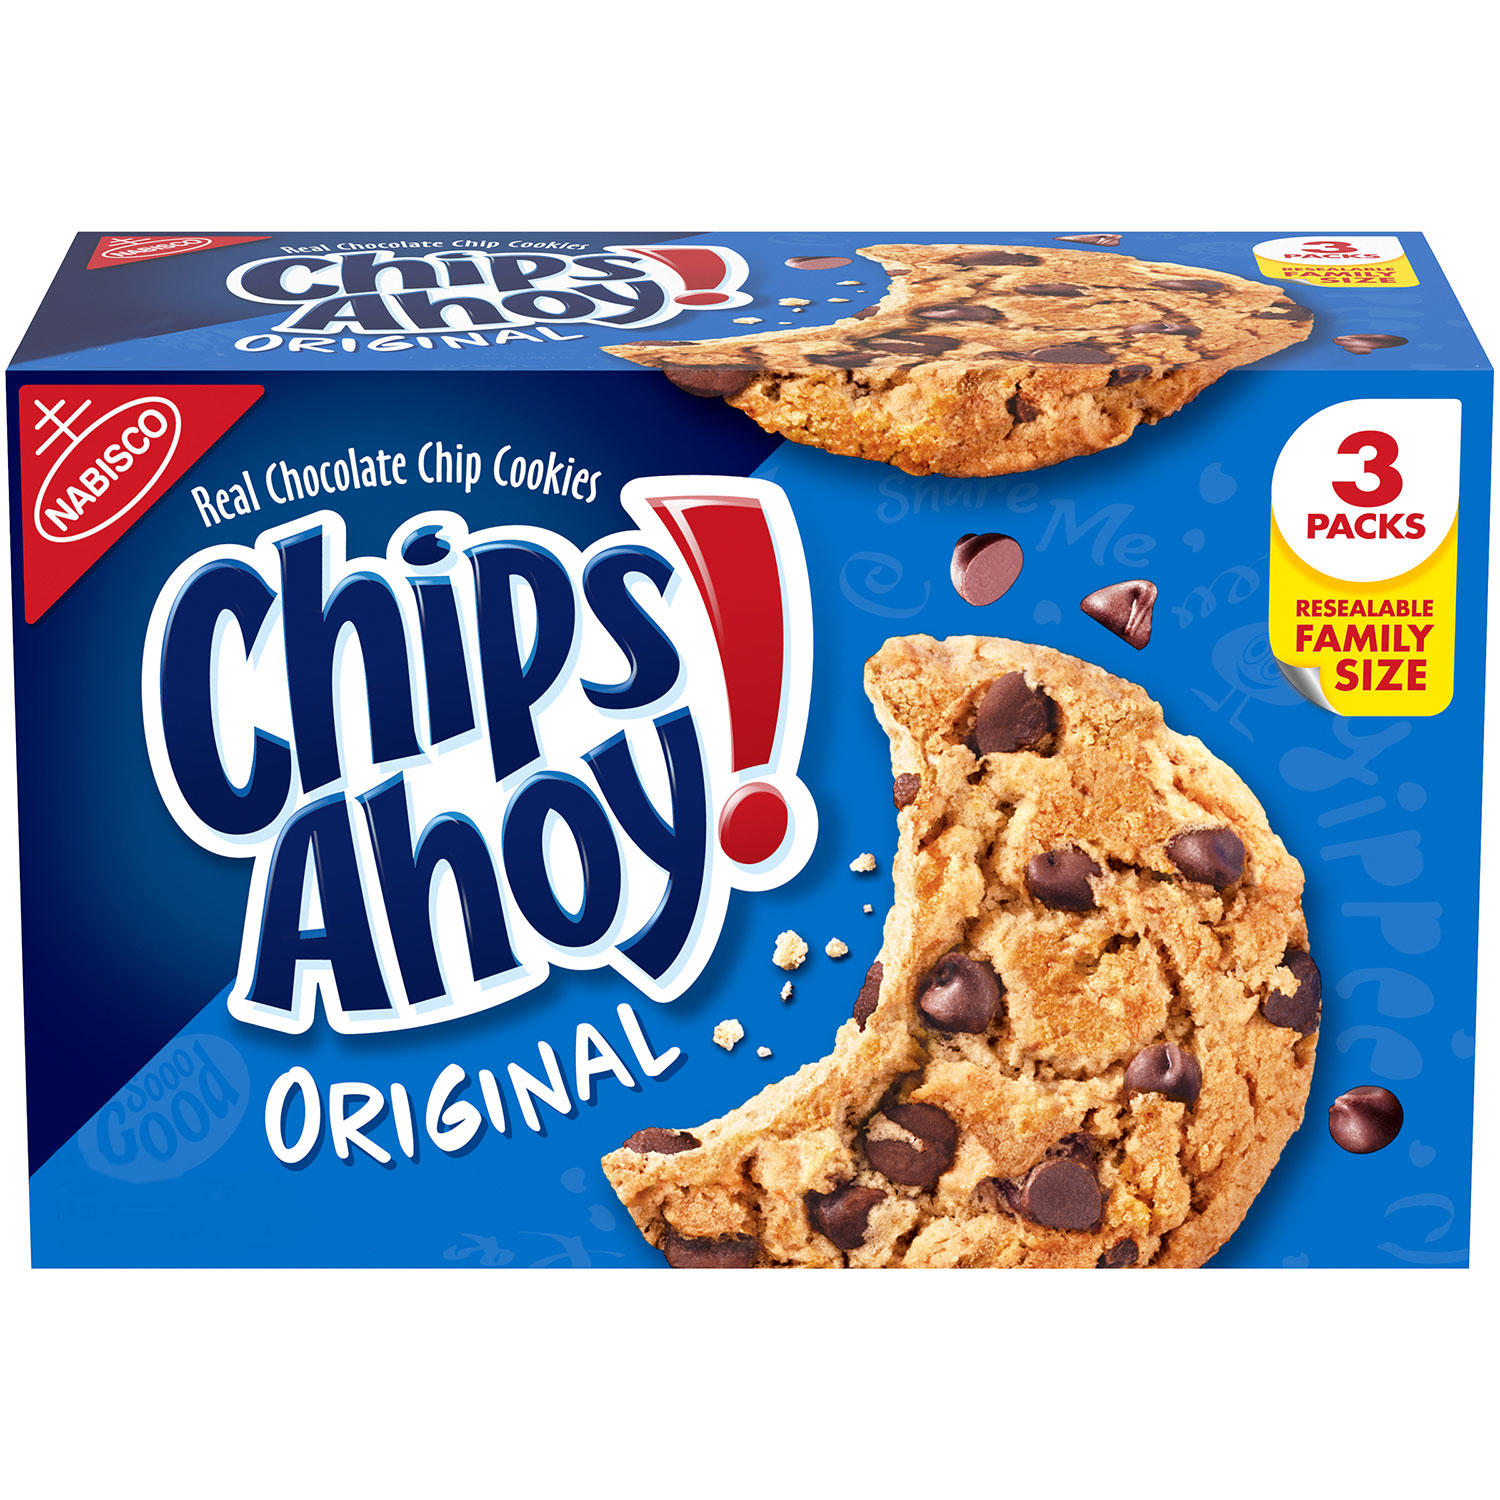 Chips Ahoy Chocolate Chip Cookies, 3 Resealable Bags, 3 lb 6.6 oz Box, Delivered in 1-4 Business Days